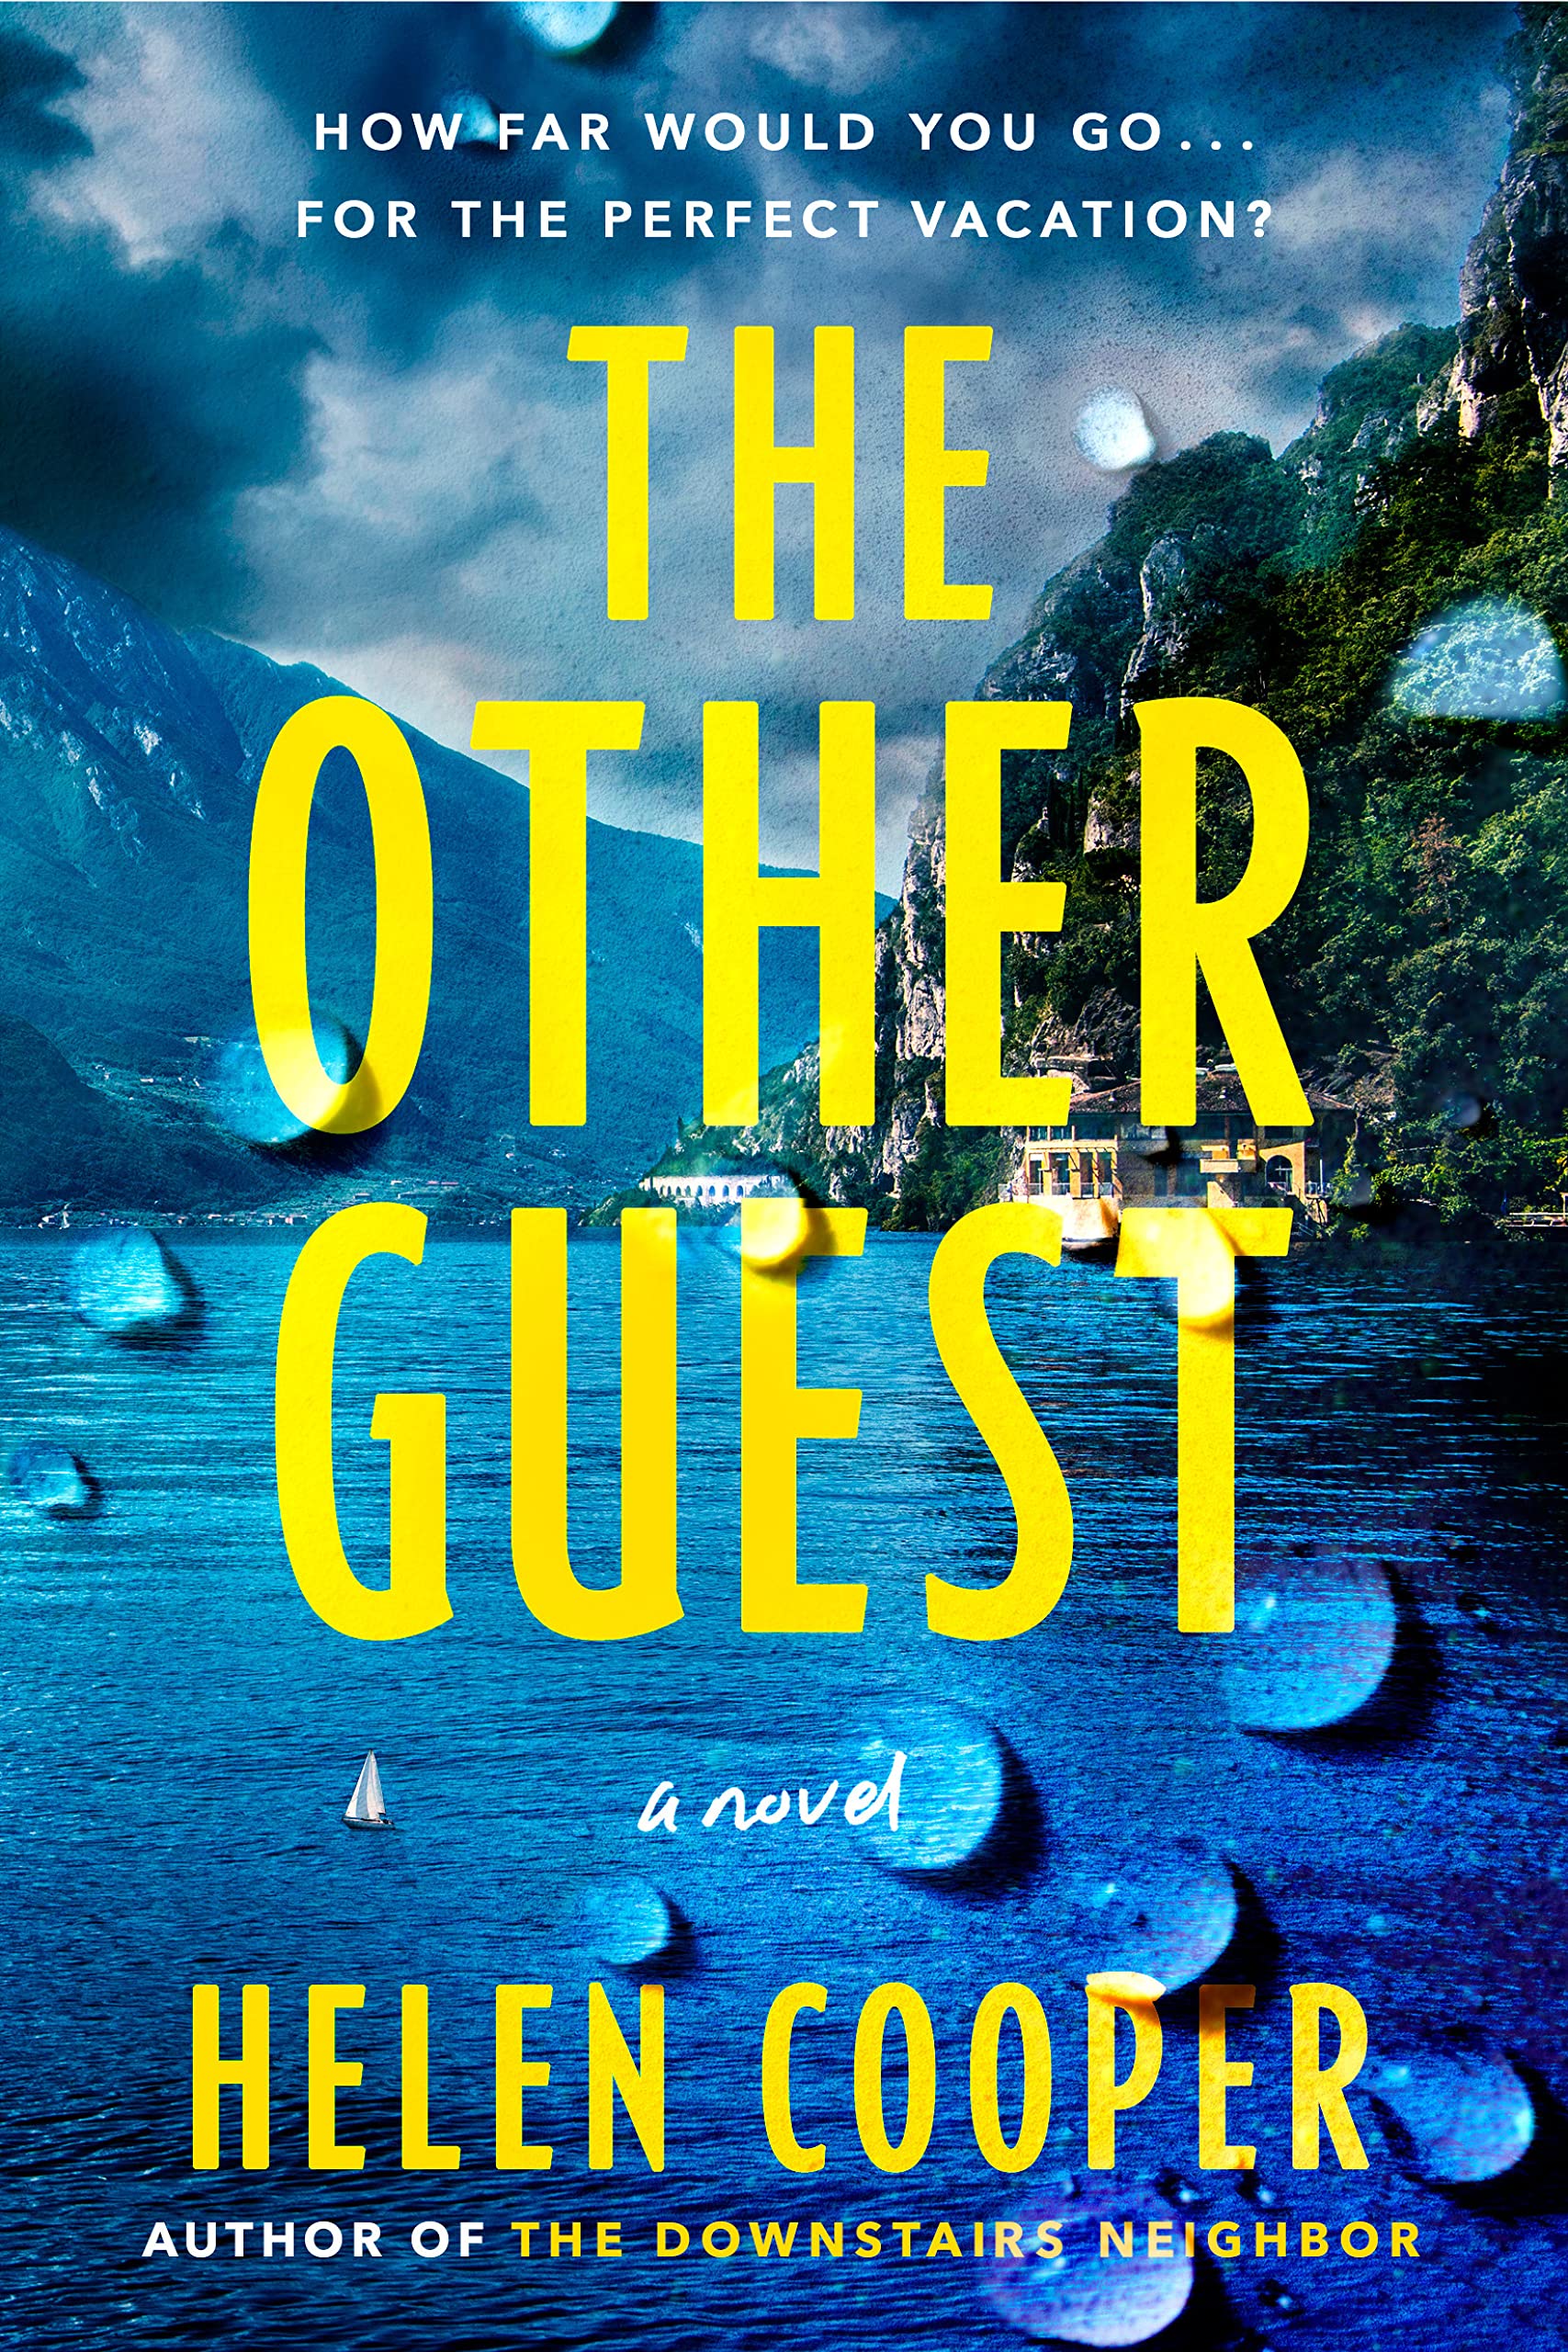 Image for "The Other Guest"